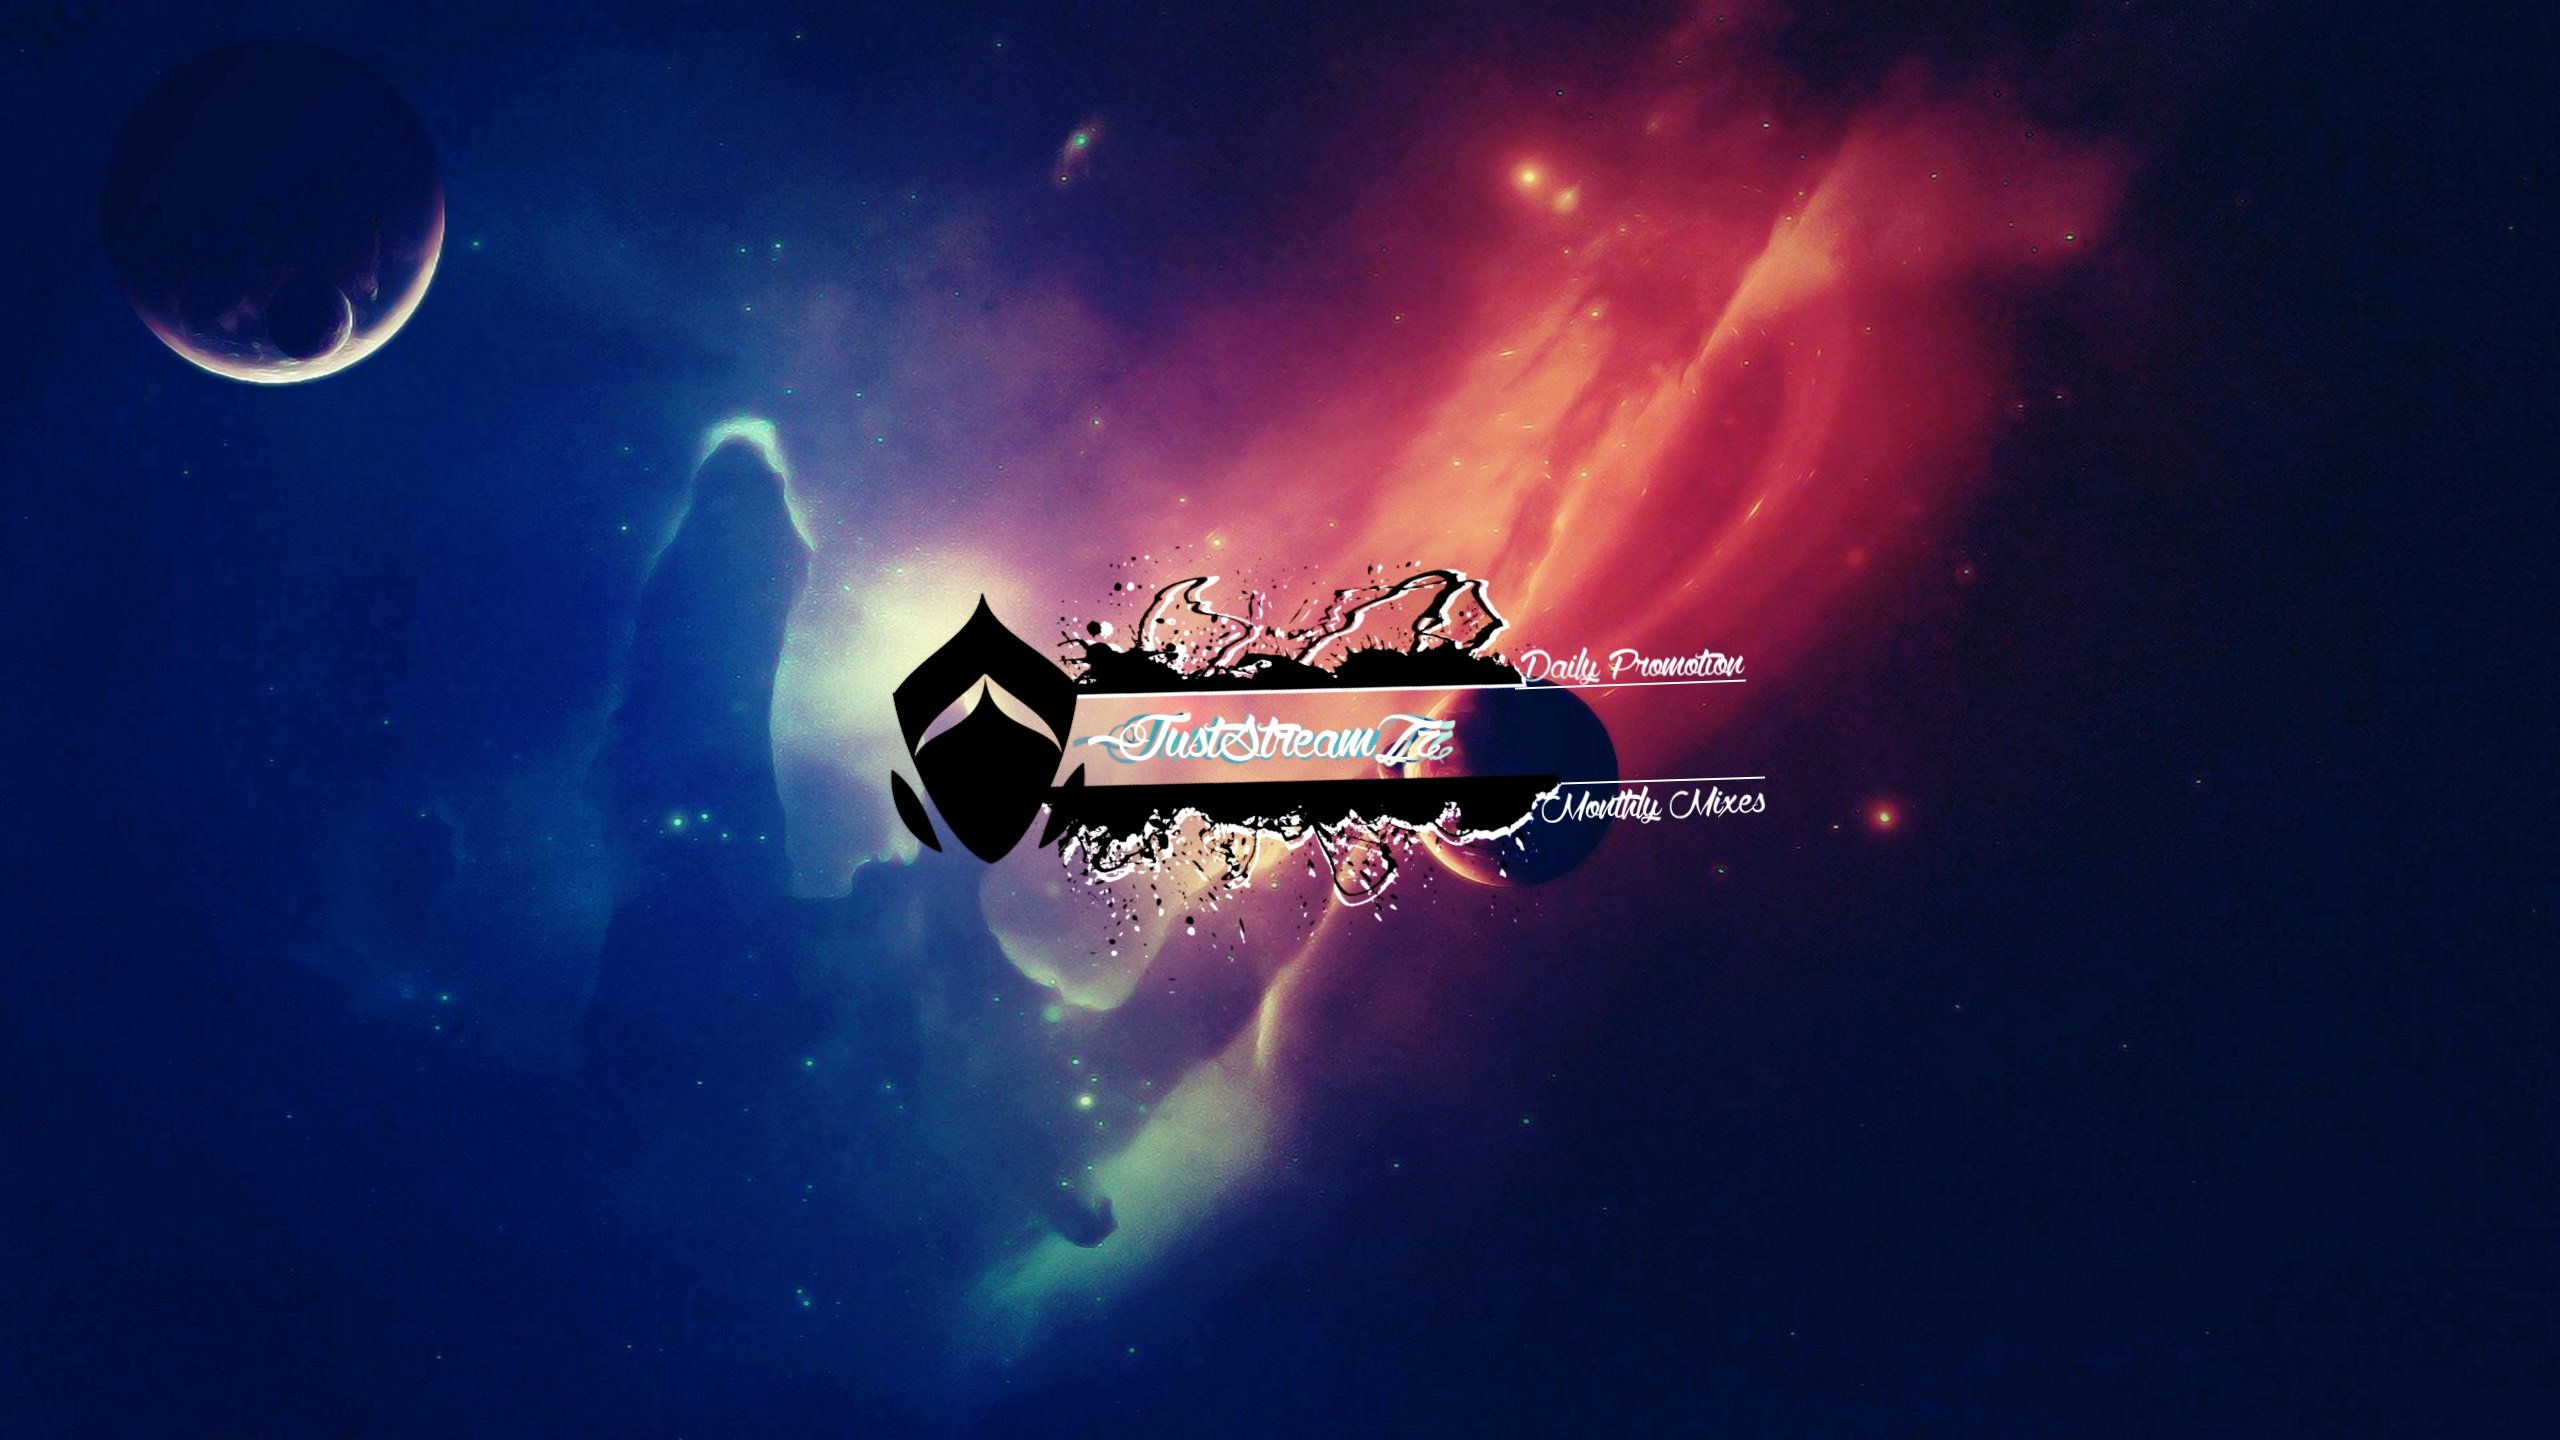 banner, Youtube, Great, Apollo, Space, Universe, Juststreamzz, Artwork